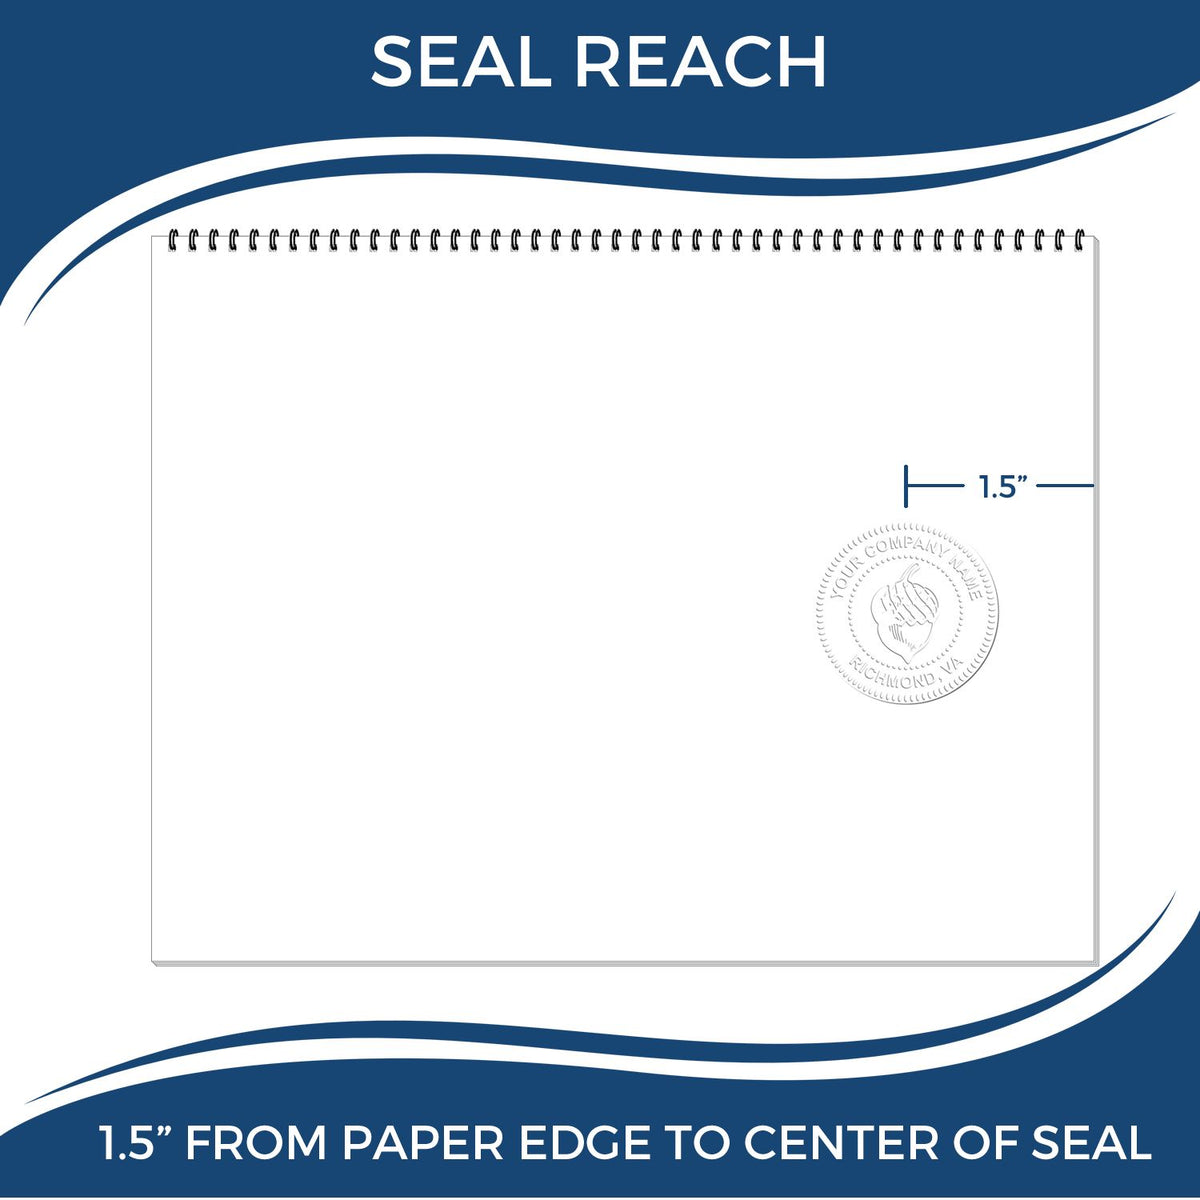 An infographic showing the seal reach which is represented by a ruler and a miniature seal image of the Handheld Iowa Architect Seal Embosser